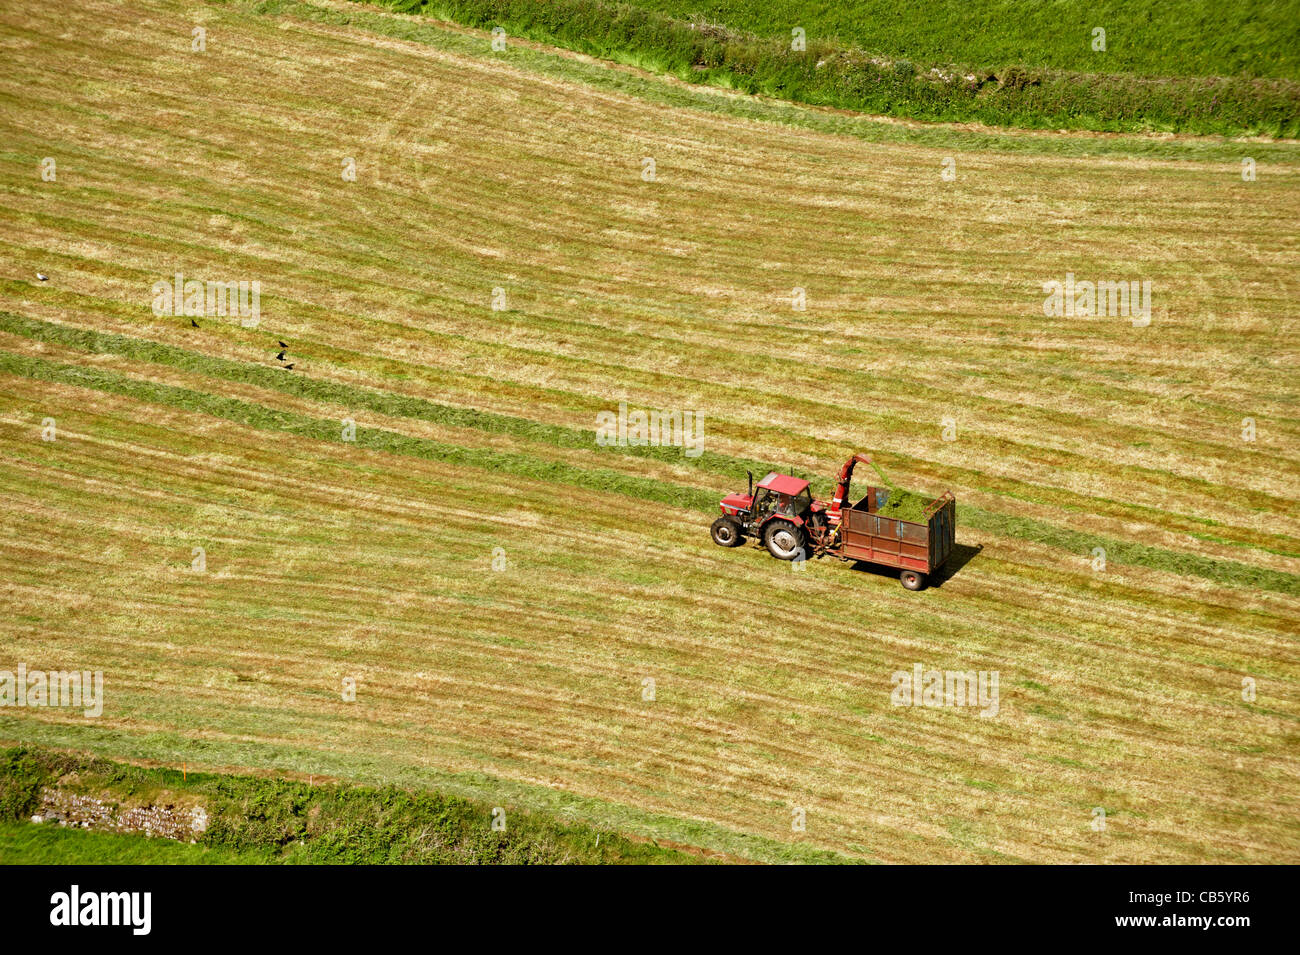 Farming and agriculture Stock Photo